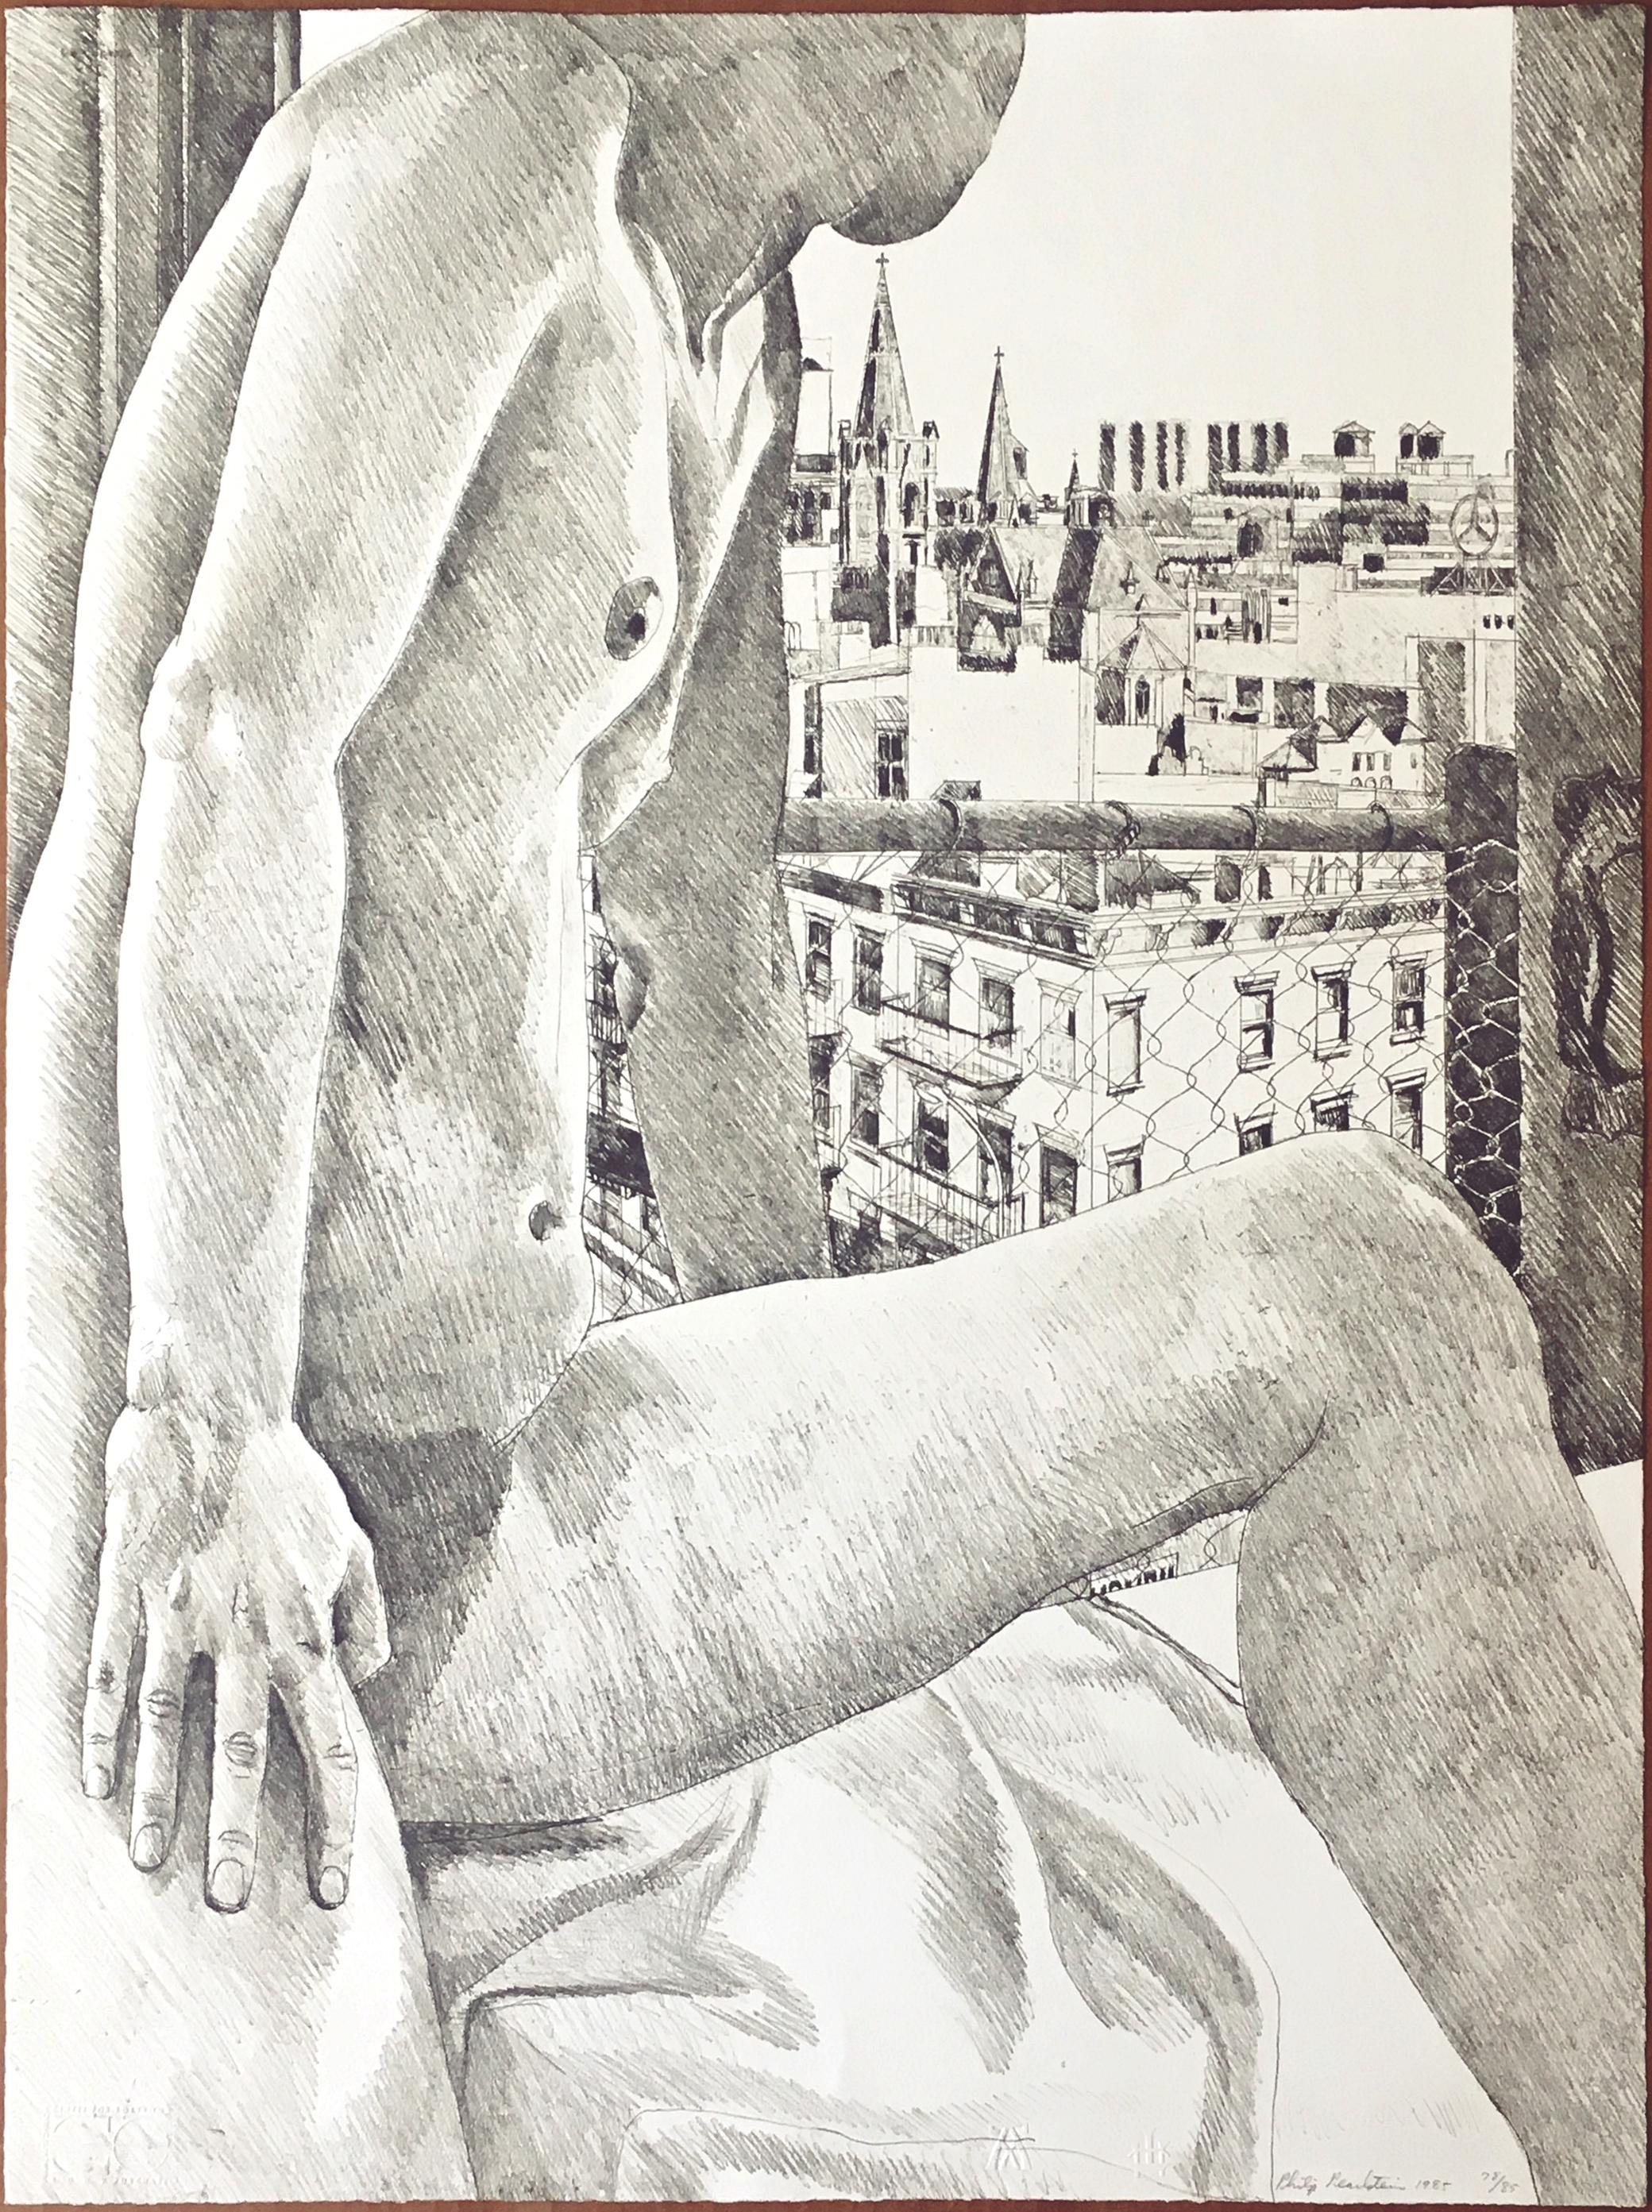 Untitled Nude, from Atelier International Portfolio by renowned realist artist - Print by Philip Pearlstein